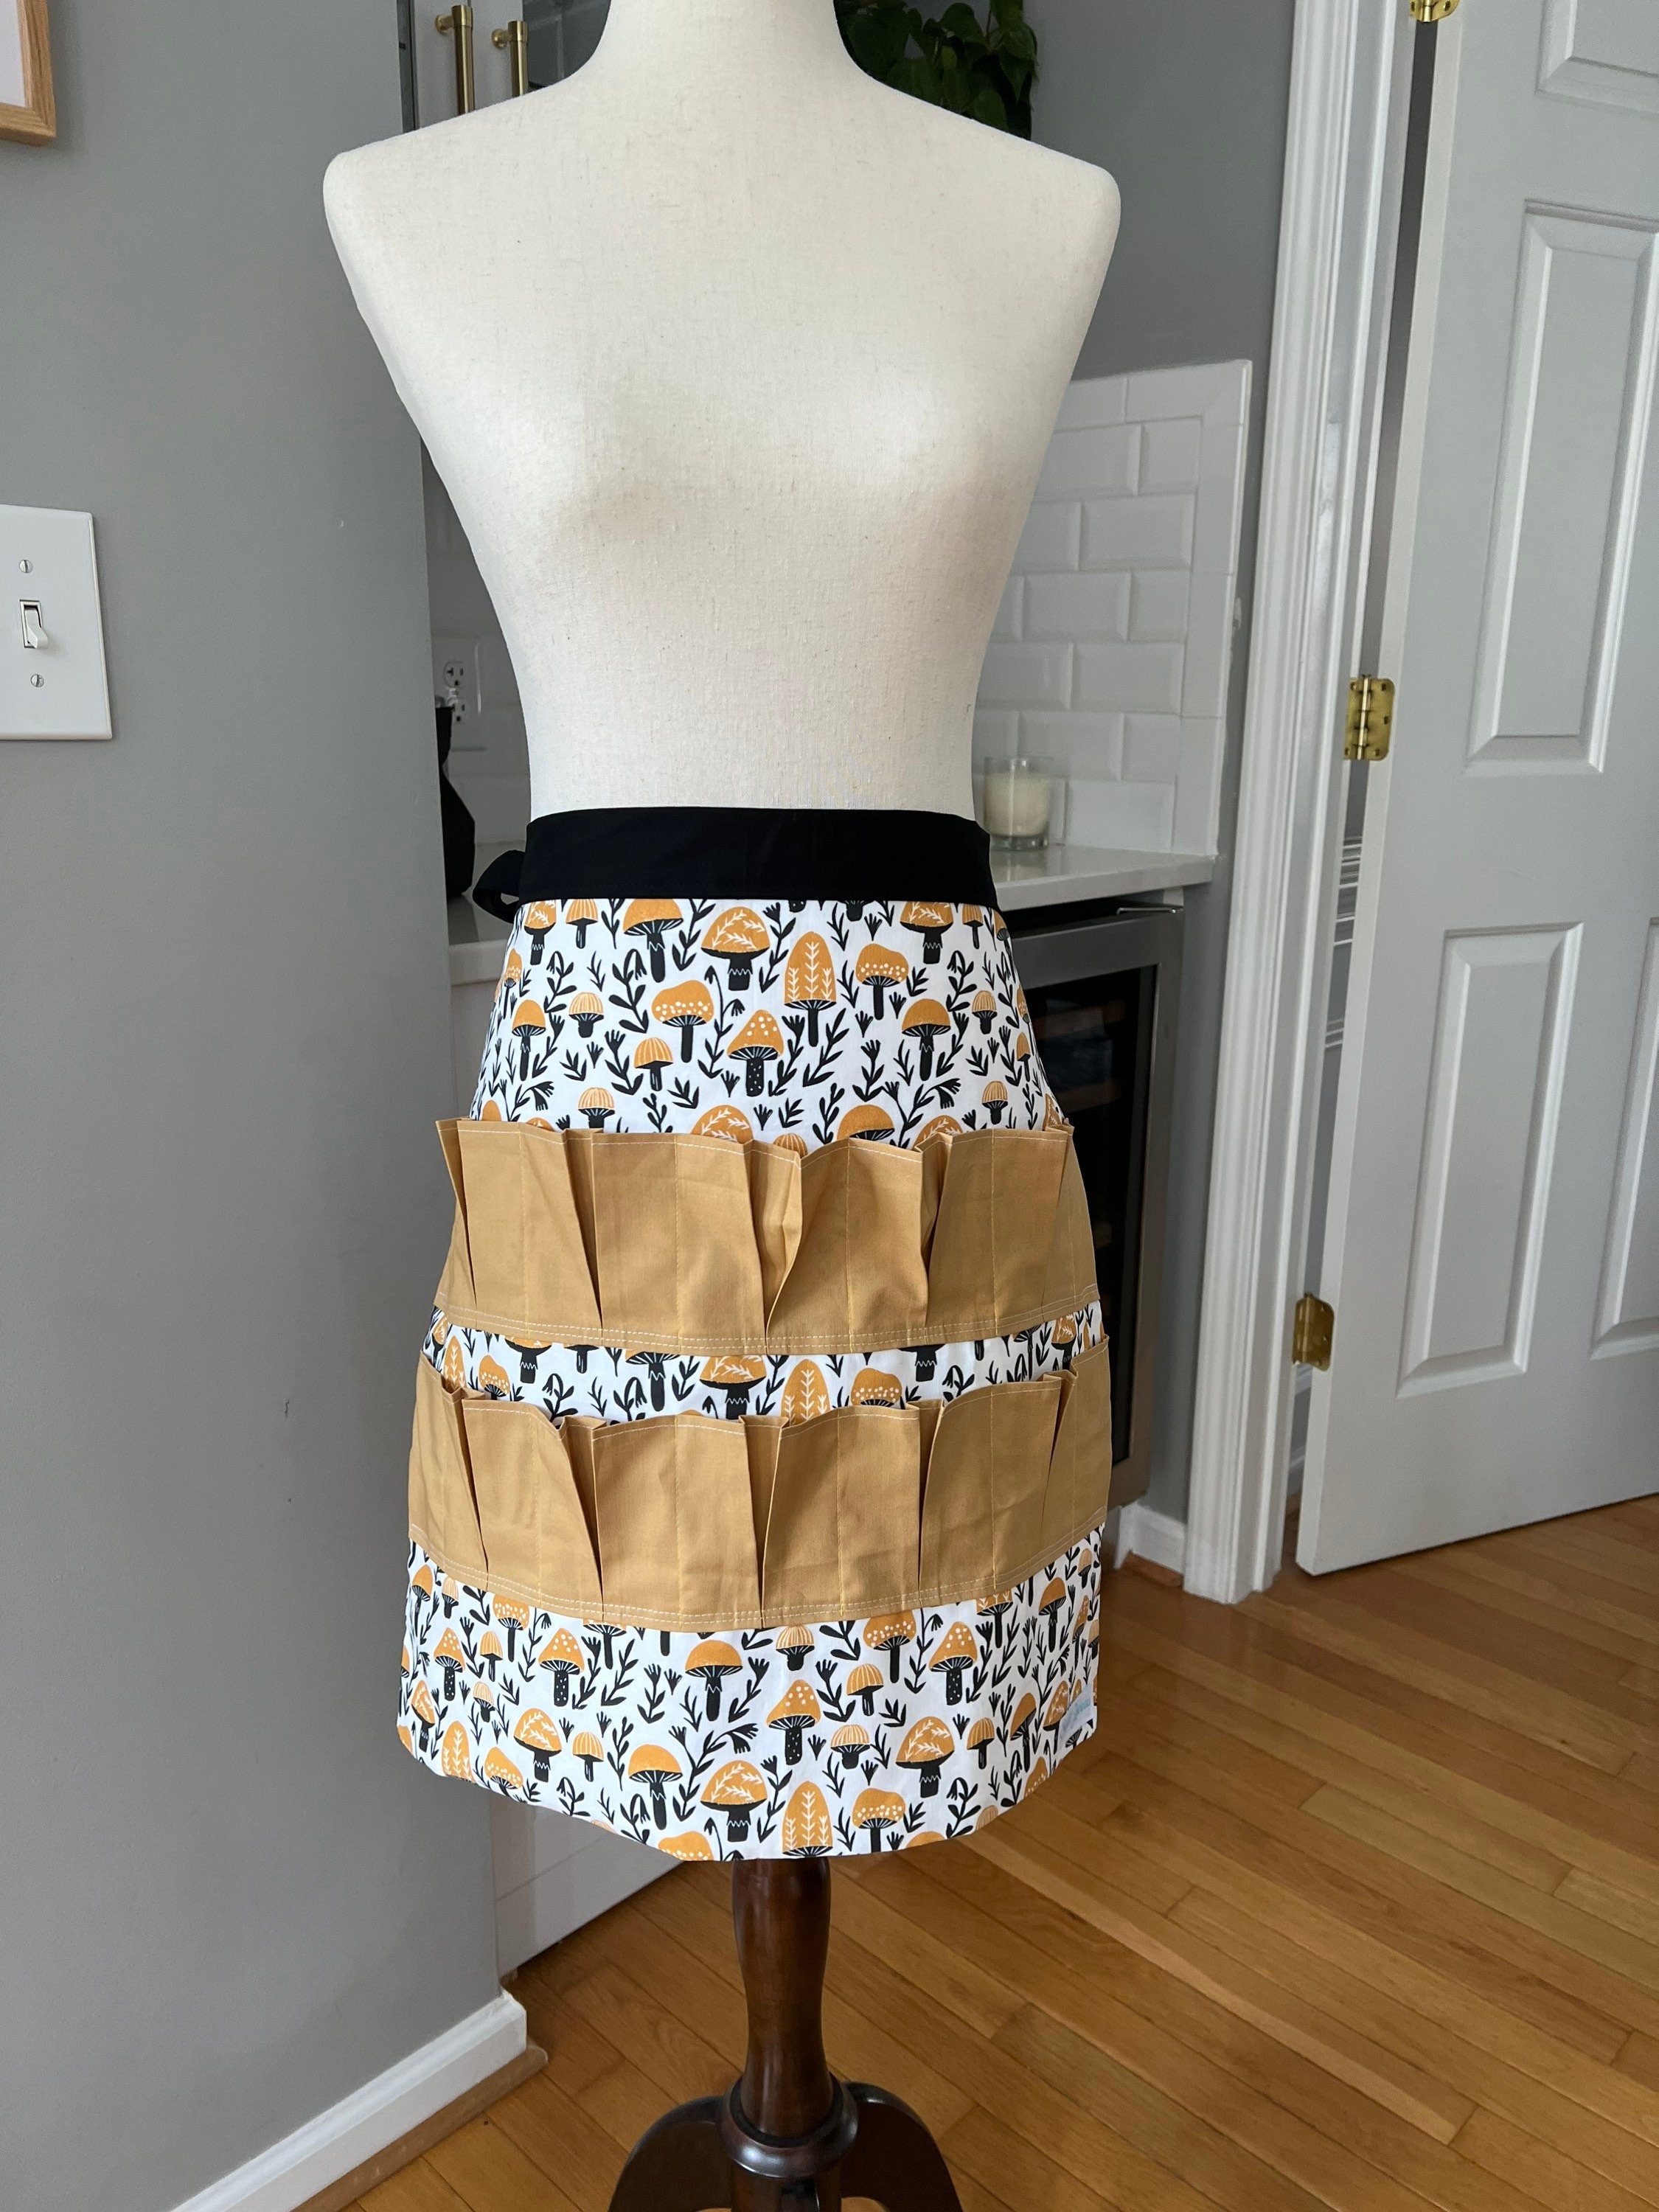 Vintage-Inspired Egg Collecting Apron - Elegant and Practical